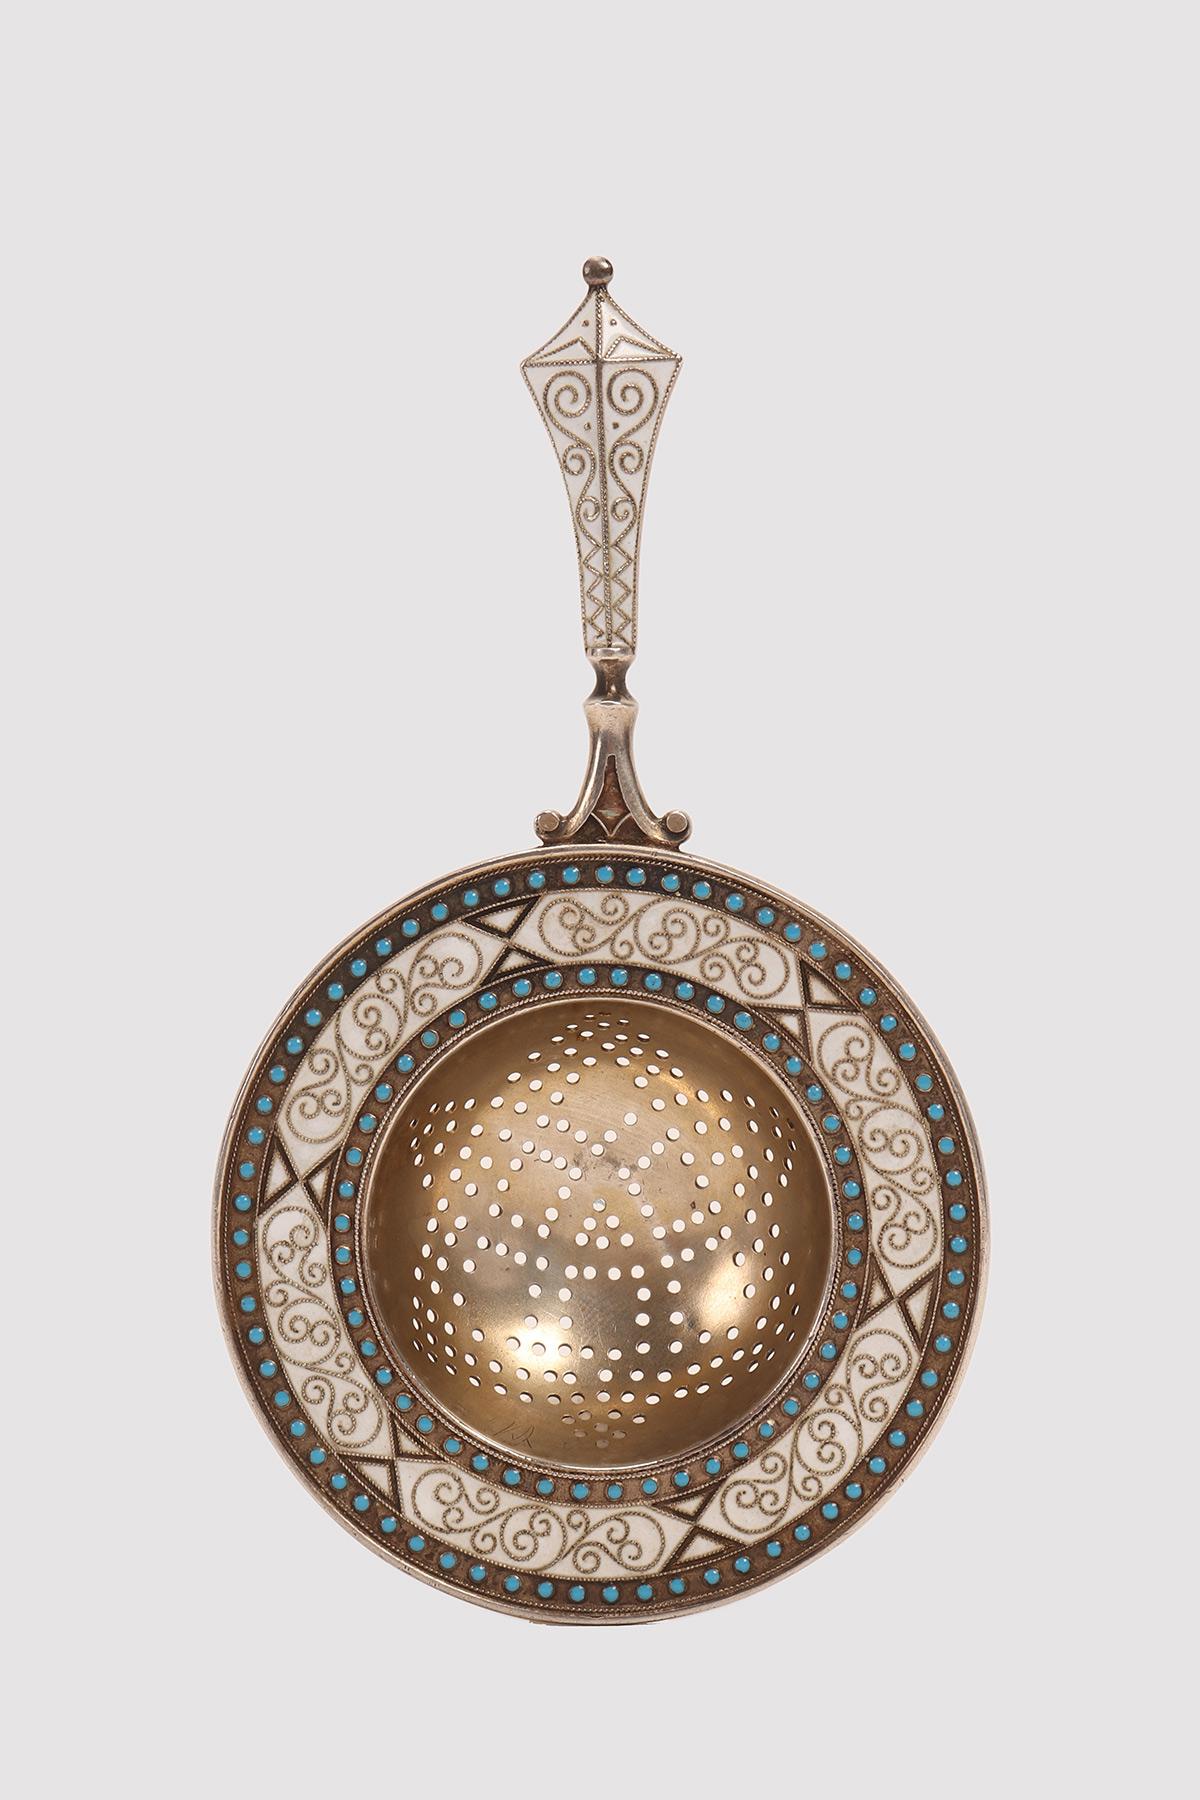 Tea strainer with handle, in gilt silver and floral decoration, with white and light blue cloisonné enamels. Work of the famous silversmith David Andersen, house founded in 1876. Christiana, Denmark circa 1900.